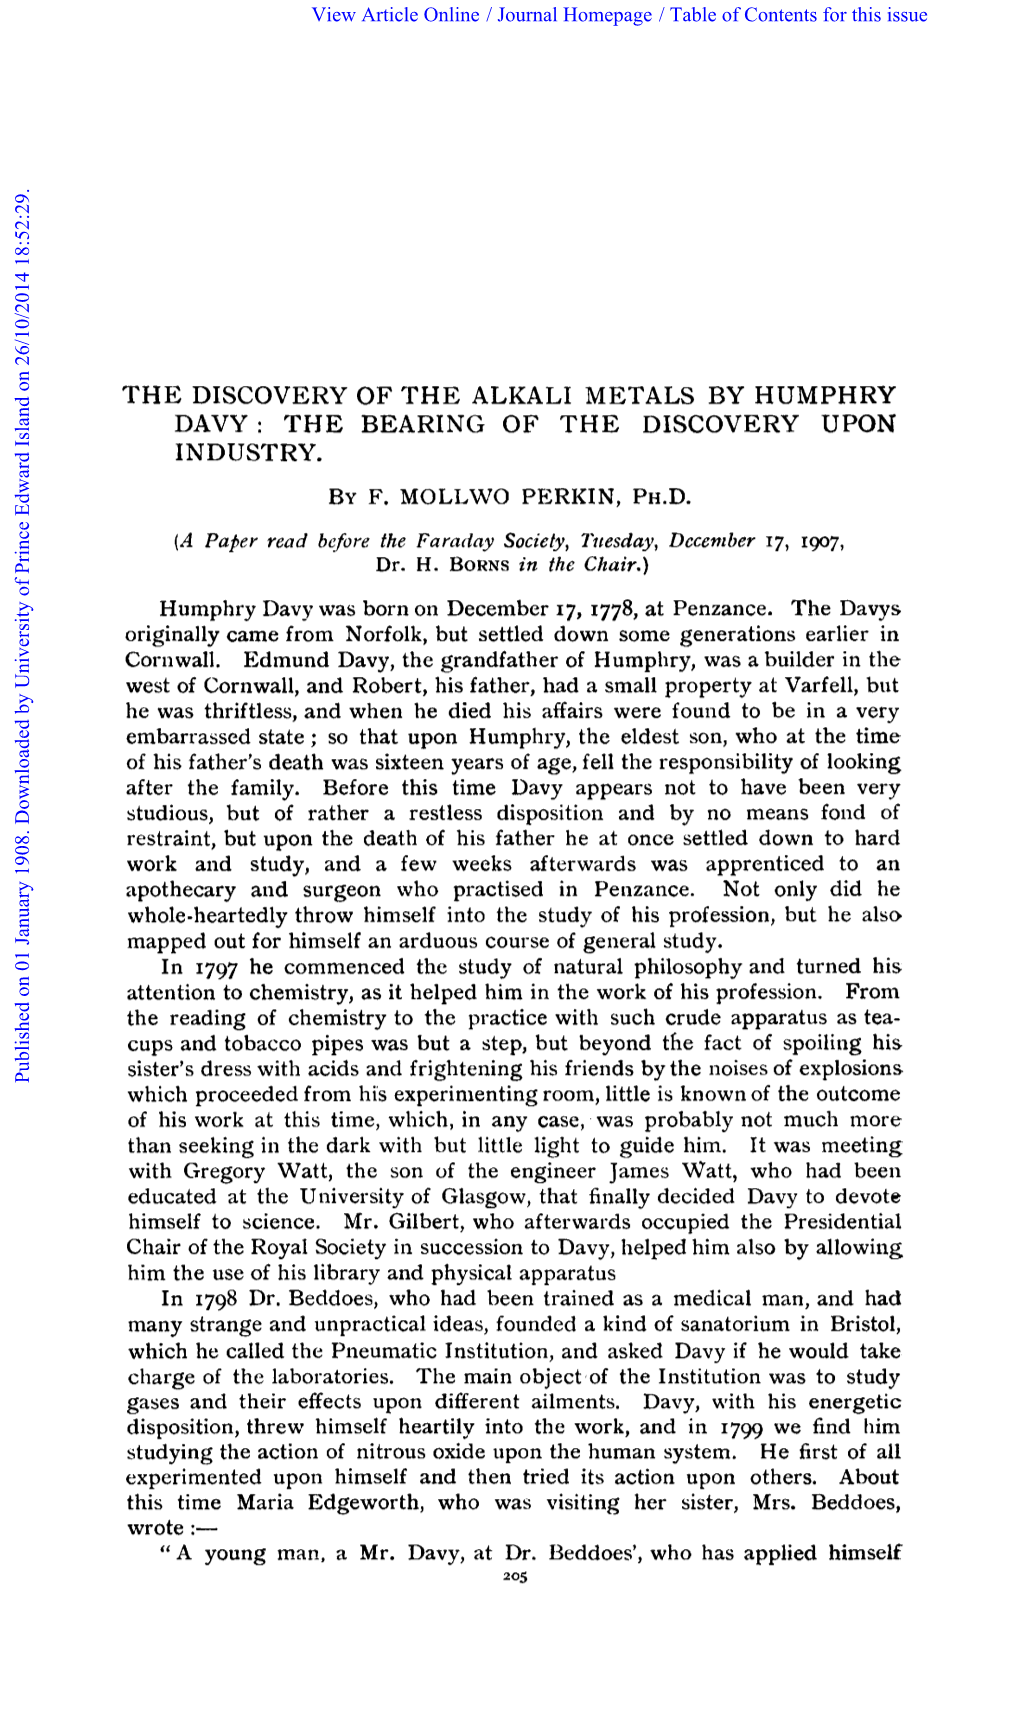 The Discovery of the Alkali Metals by Humphry Davy: the Bearing of the Discovery Upon Industry